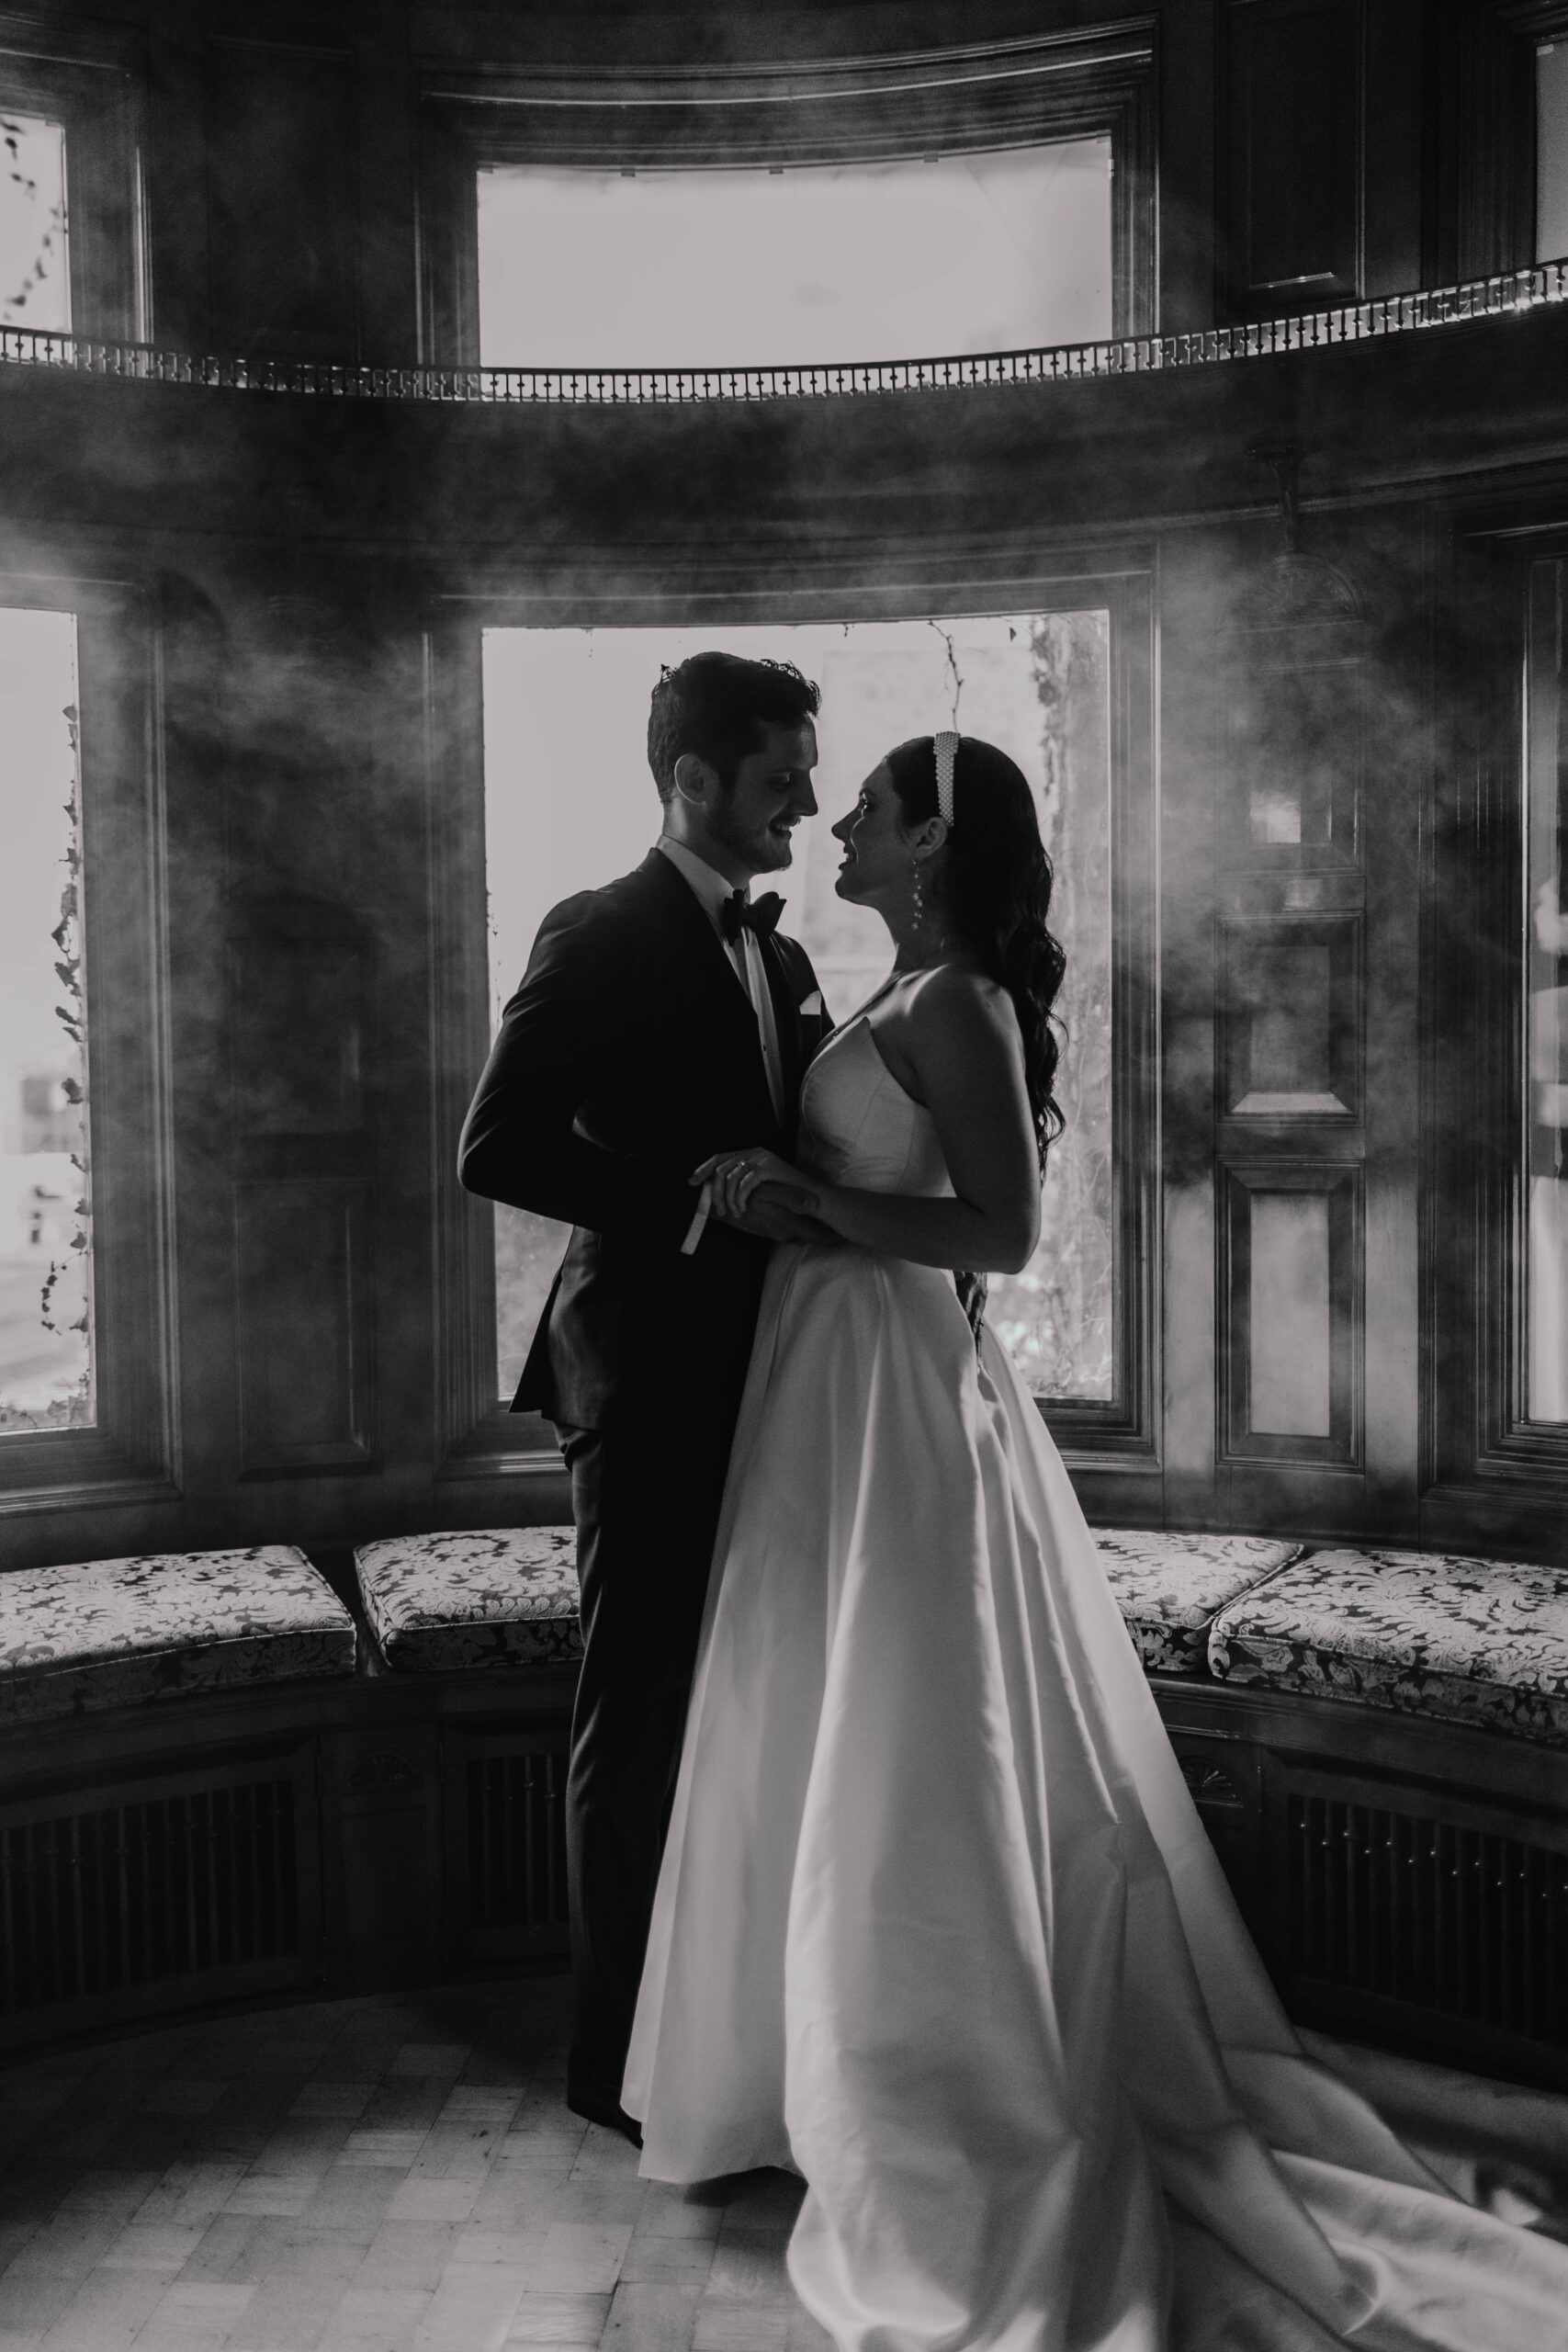 Bride and groom slow dancing together in front of a big window 